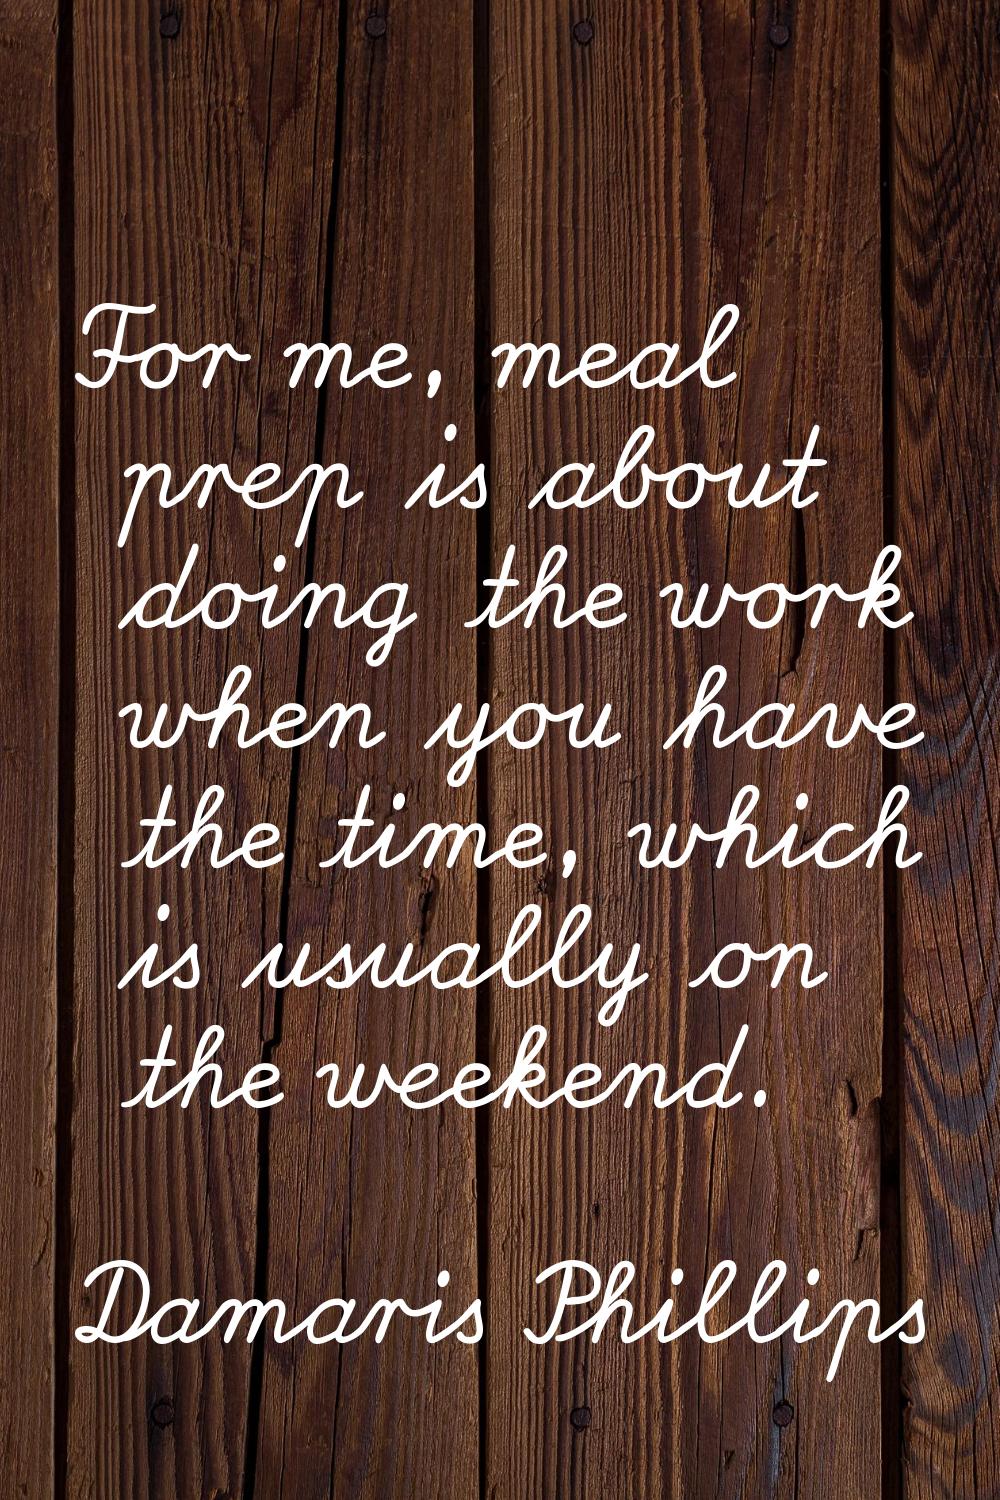 For me, meal prep is about doing the work when you have the time, which is usually on the weekend.